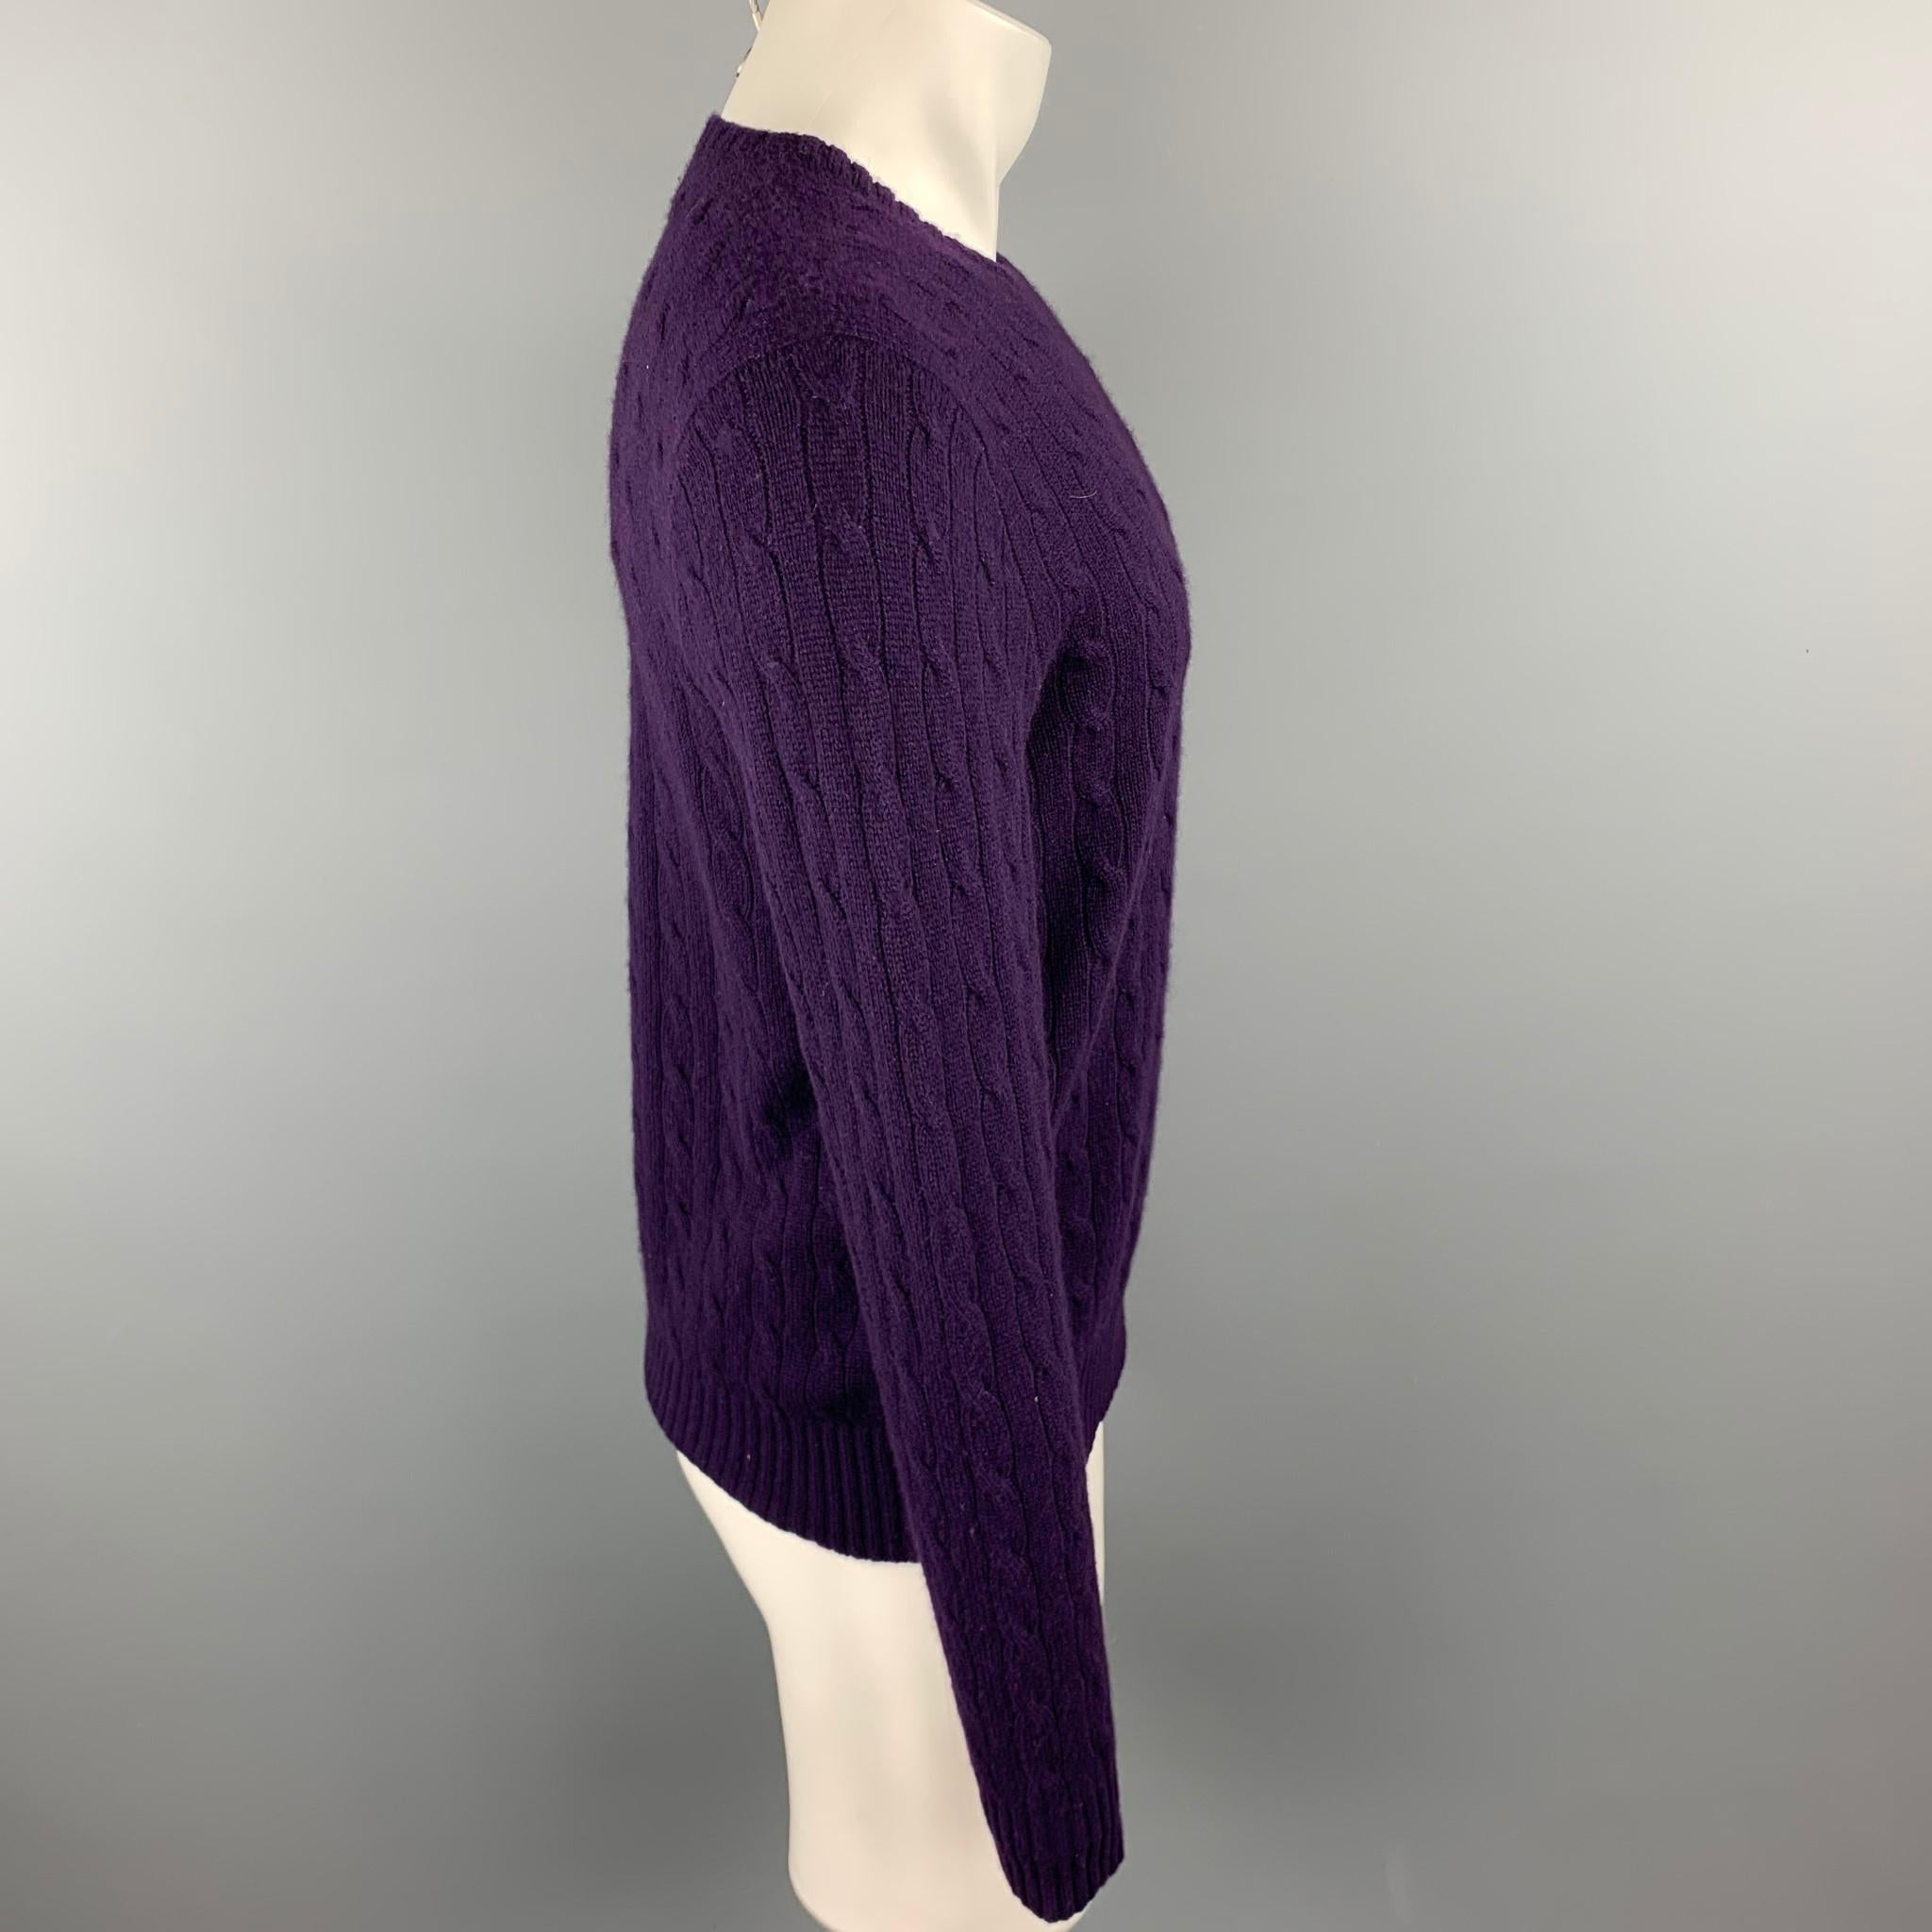 RALPH LAUREN sweater comes in a forest purple cable knit cashmere featuring a crew-neck.

Excellent Pre-Owned Condition.
Marked: M

Measurements:

Shoulder: 18 in.
Chest: 40 in.
Sleeve: 26.5 in.
Length: 25 in.  